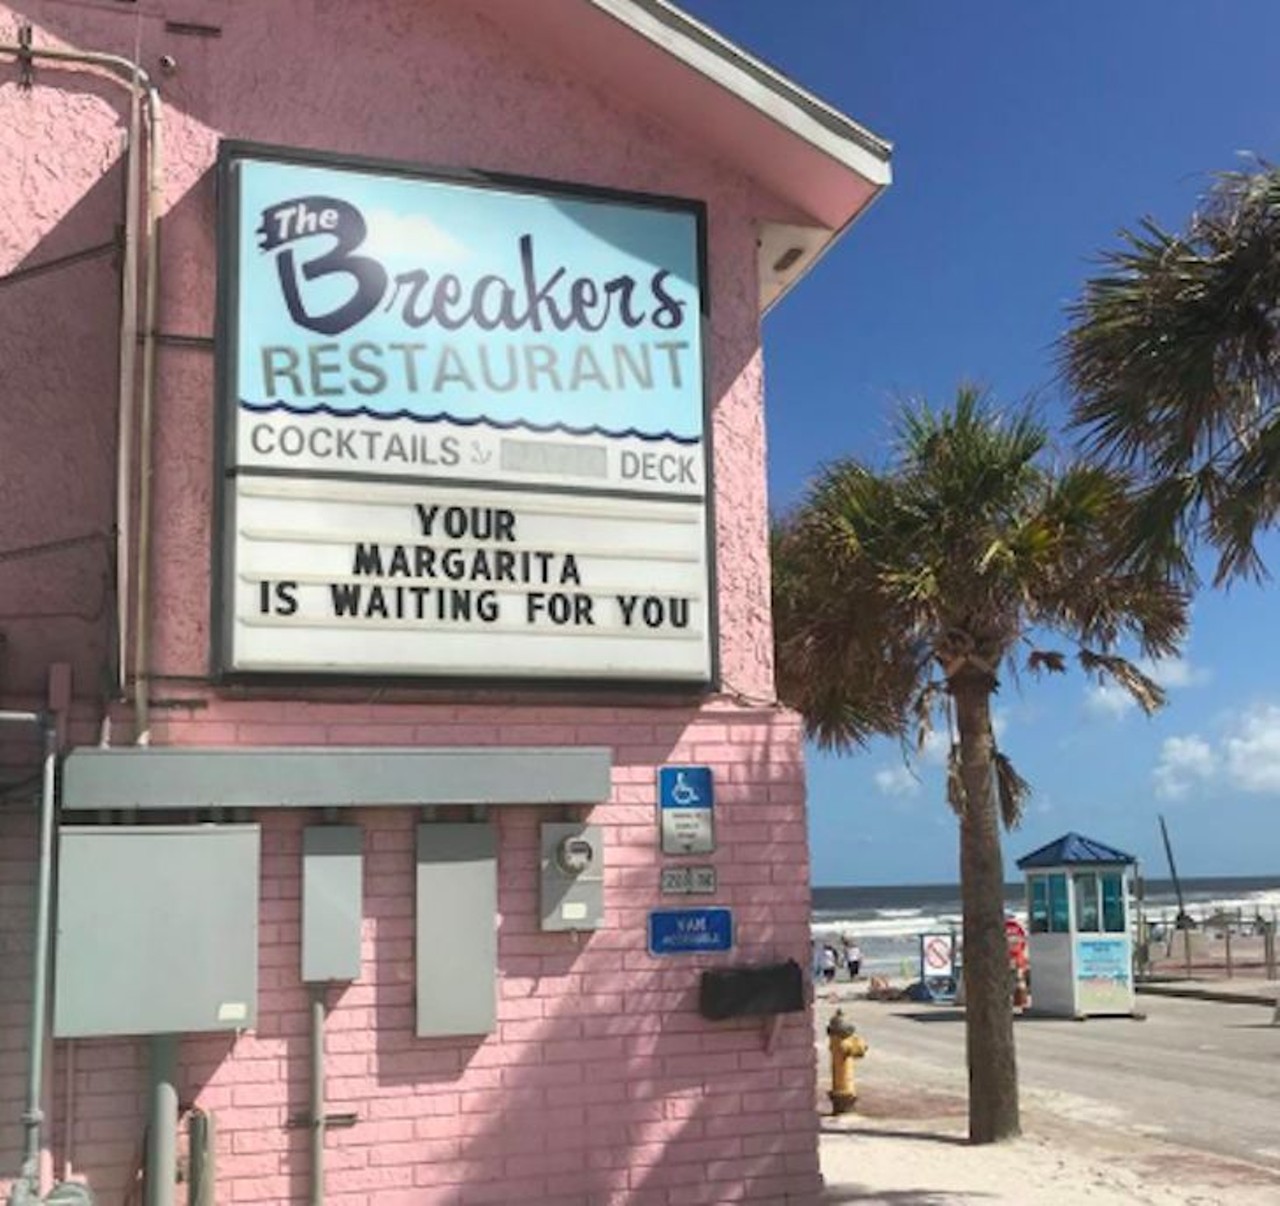 Grab some American grub and beer at The Breakers
518 Flagler Ave, New Smyrna Beach, FL (386) 428-2019 
The Breakers offers an impressive 17 different types of burgers. If burgers aren&#146;t your thing, there&#146;s plenty of seafood options. A great place to stop for a bite and some drinks after hitting the white sandy beaches, you&#146;ll recognize Breakers by its famous pink building. 
Photo via The Breakers Restaurant/Facebook